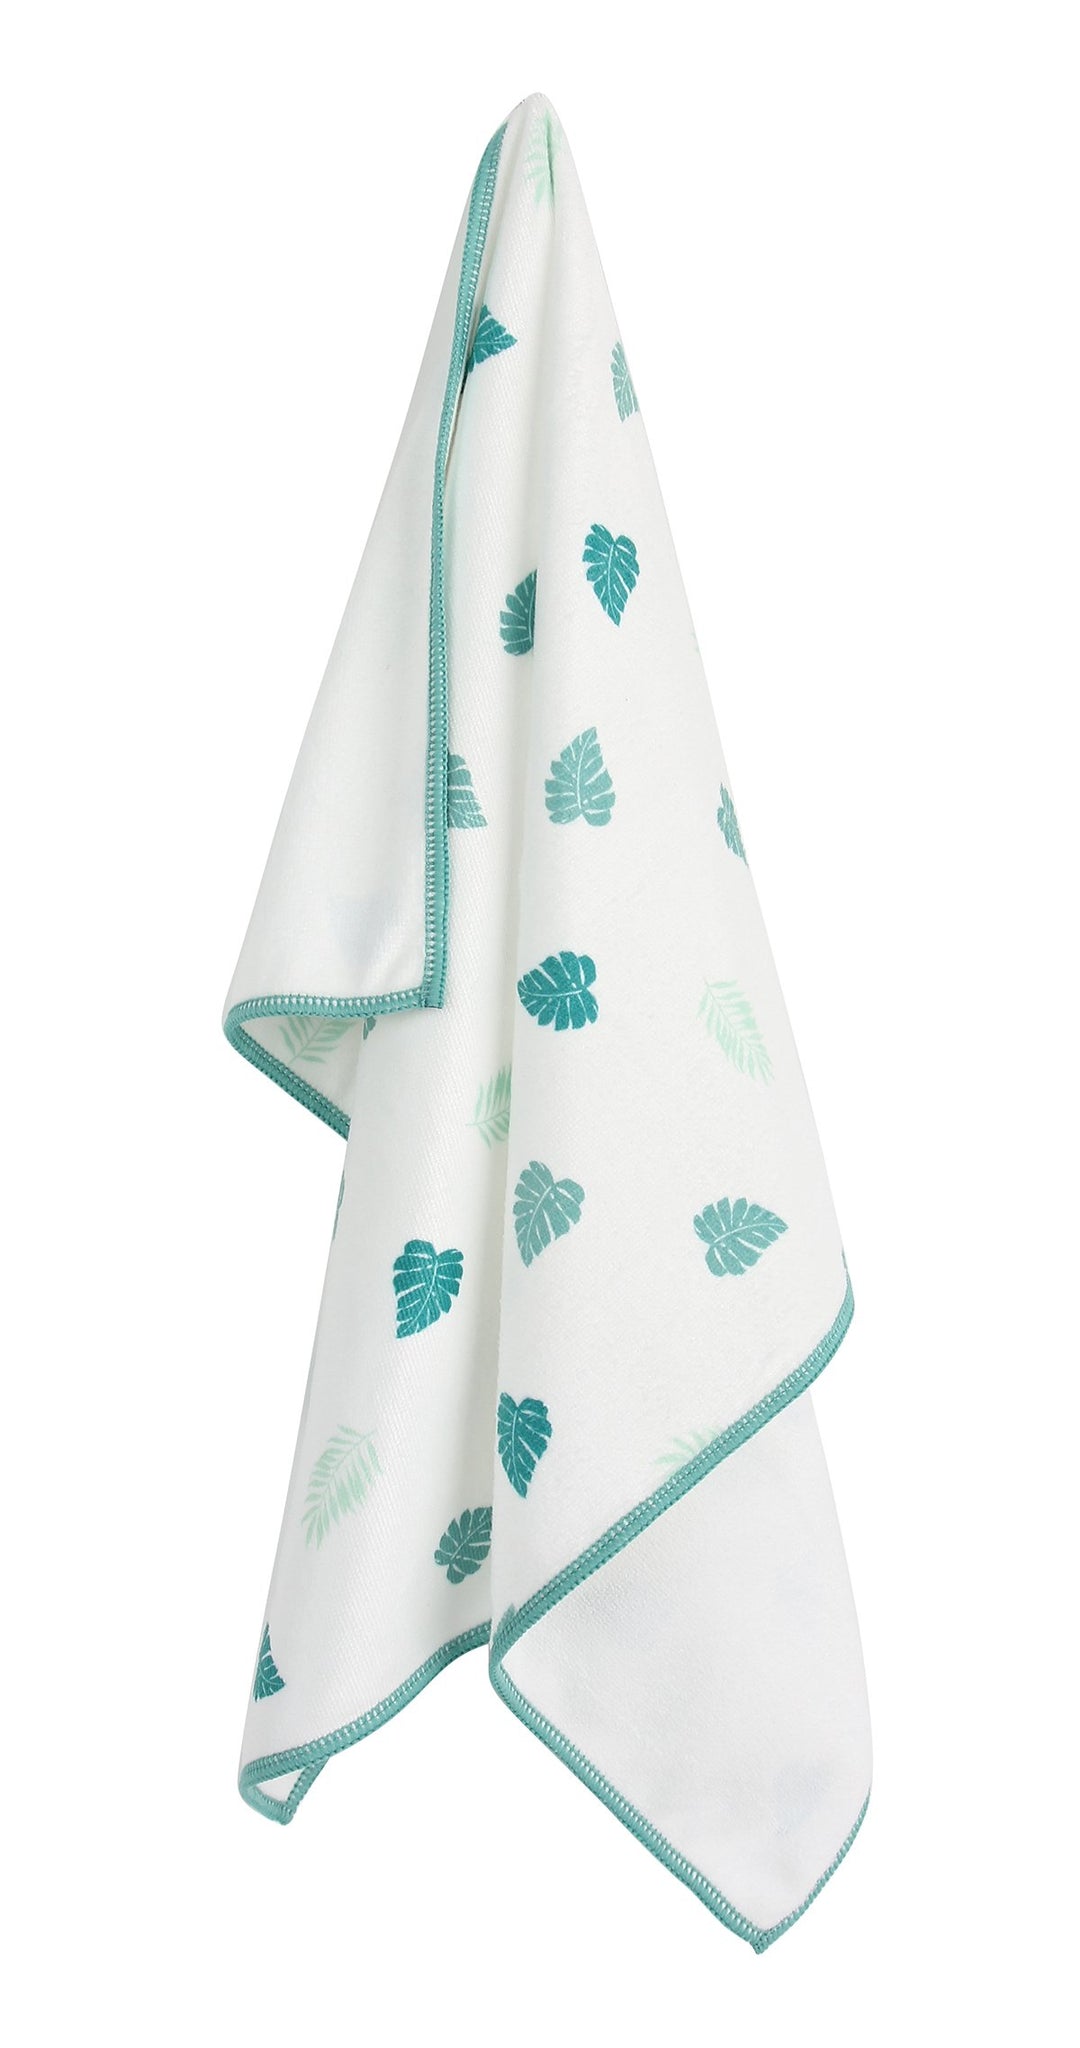 10 Best Dish Towels for 2021 - Best Dish Towels on